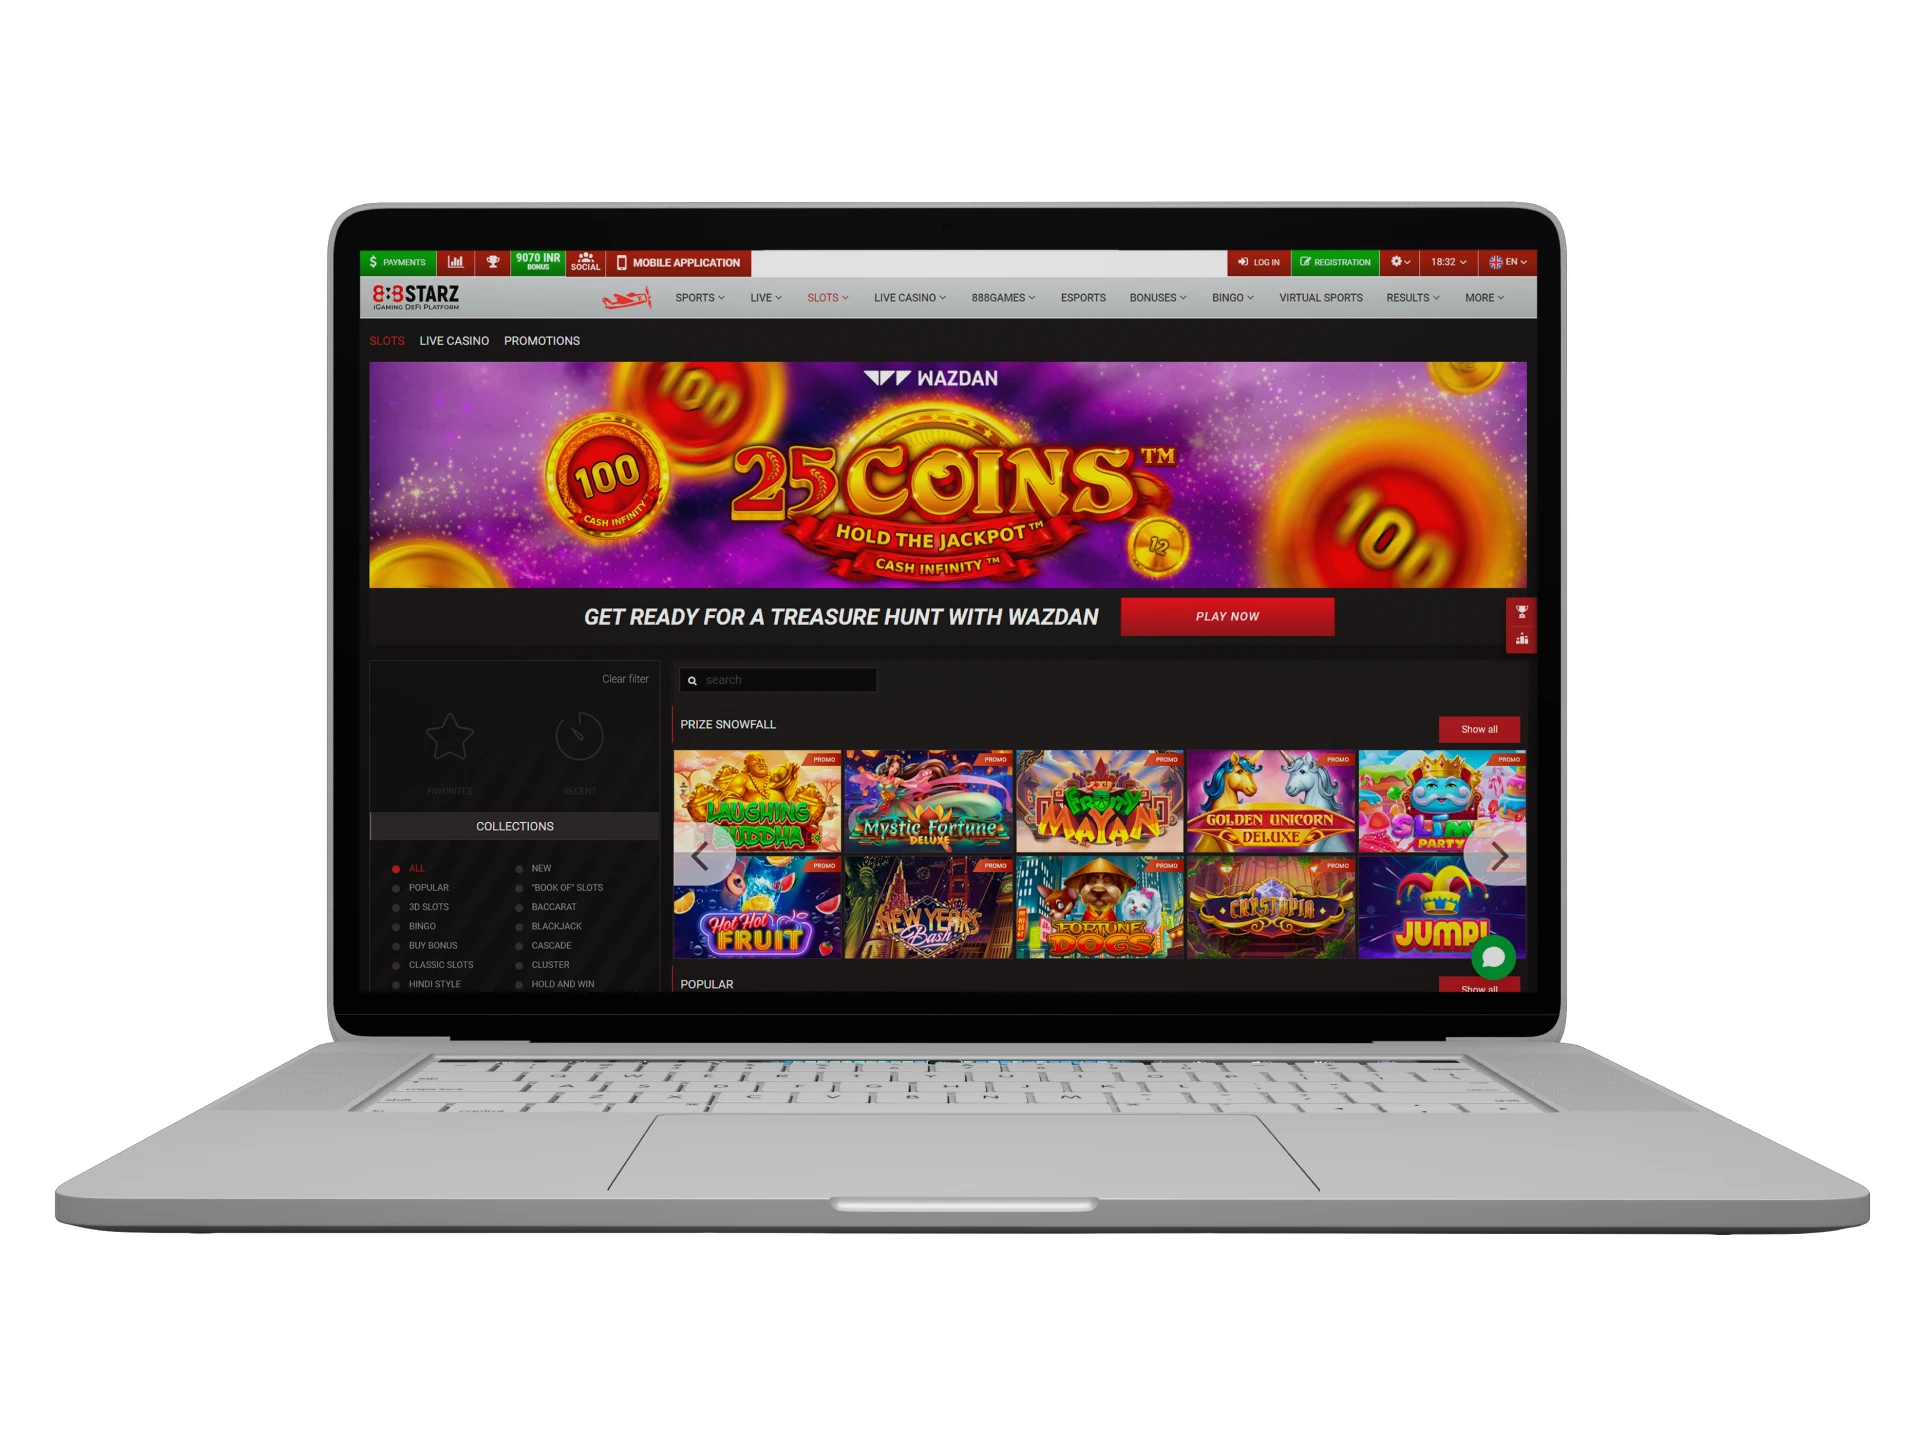 Choose to play any slots from the huge selection at 888starz.